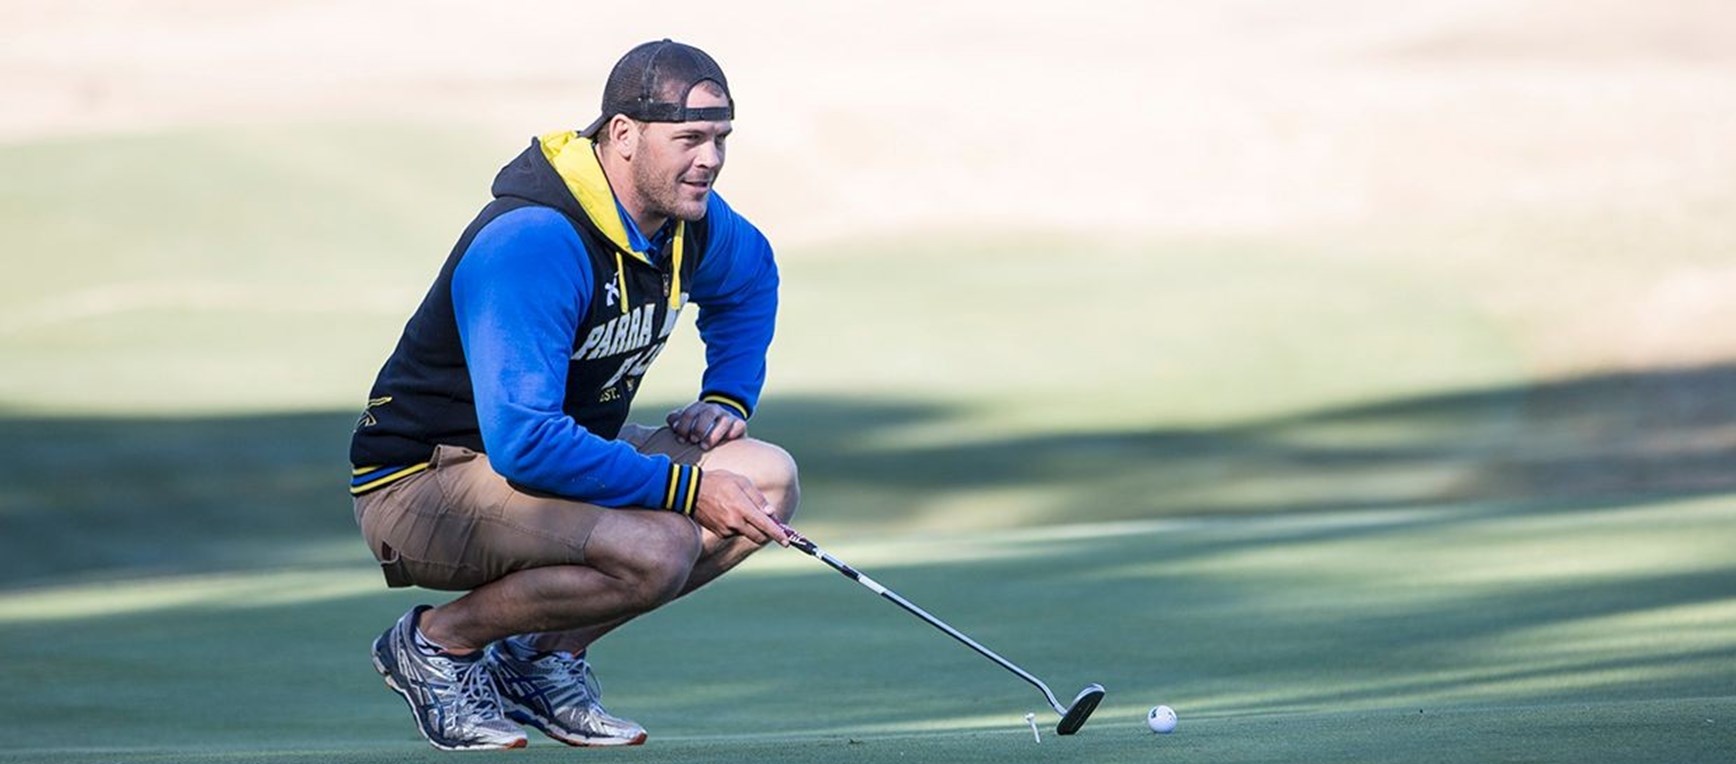 GALLERY | 2016 Corporate Golf Day